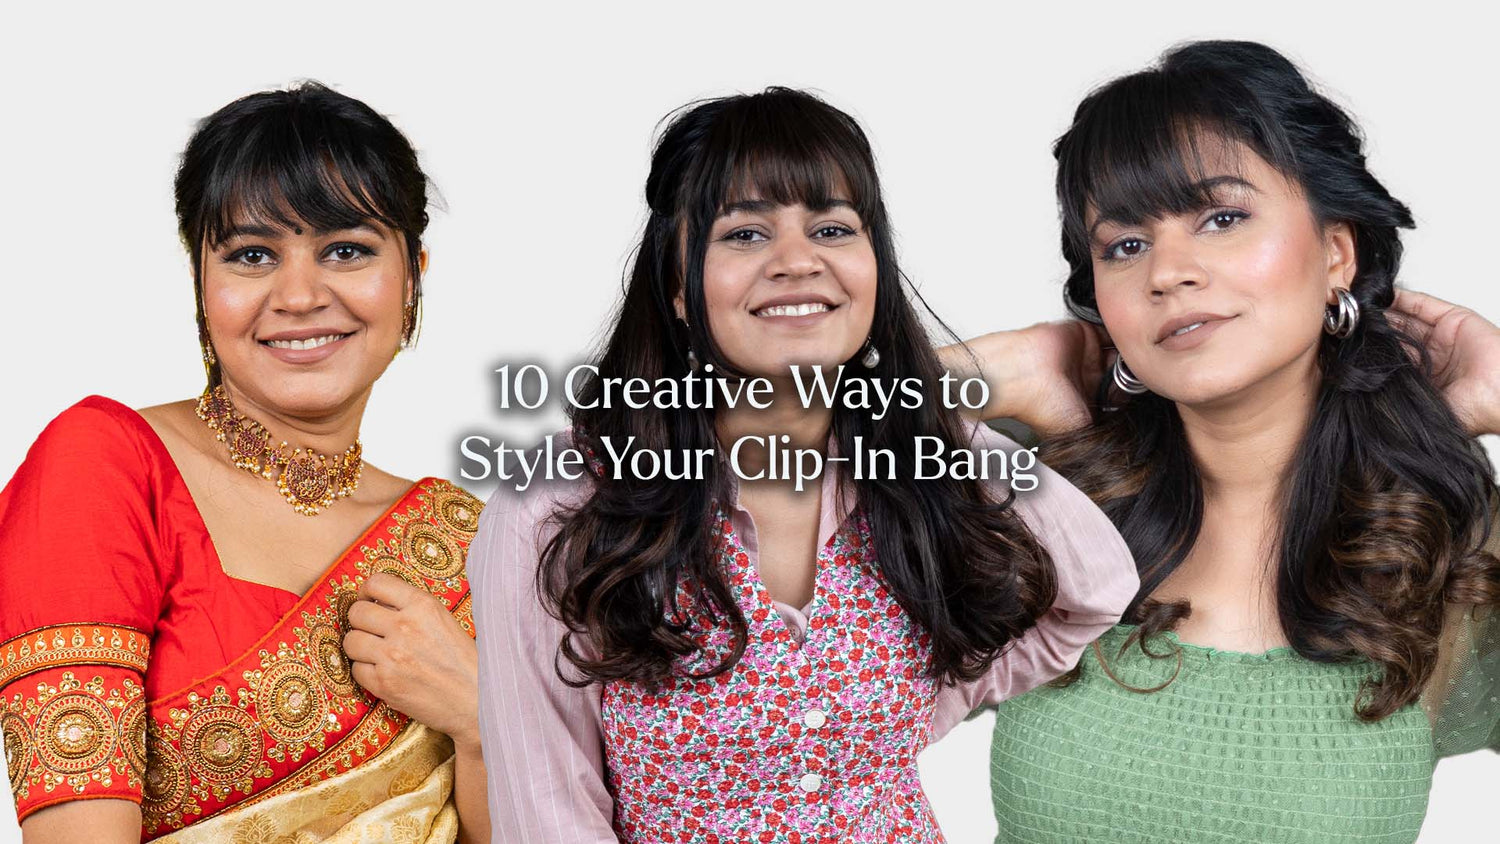 Creative Ways to Style Your Clip-In Bang